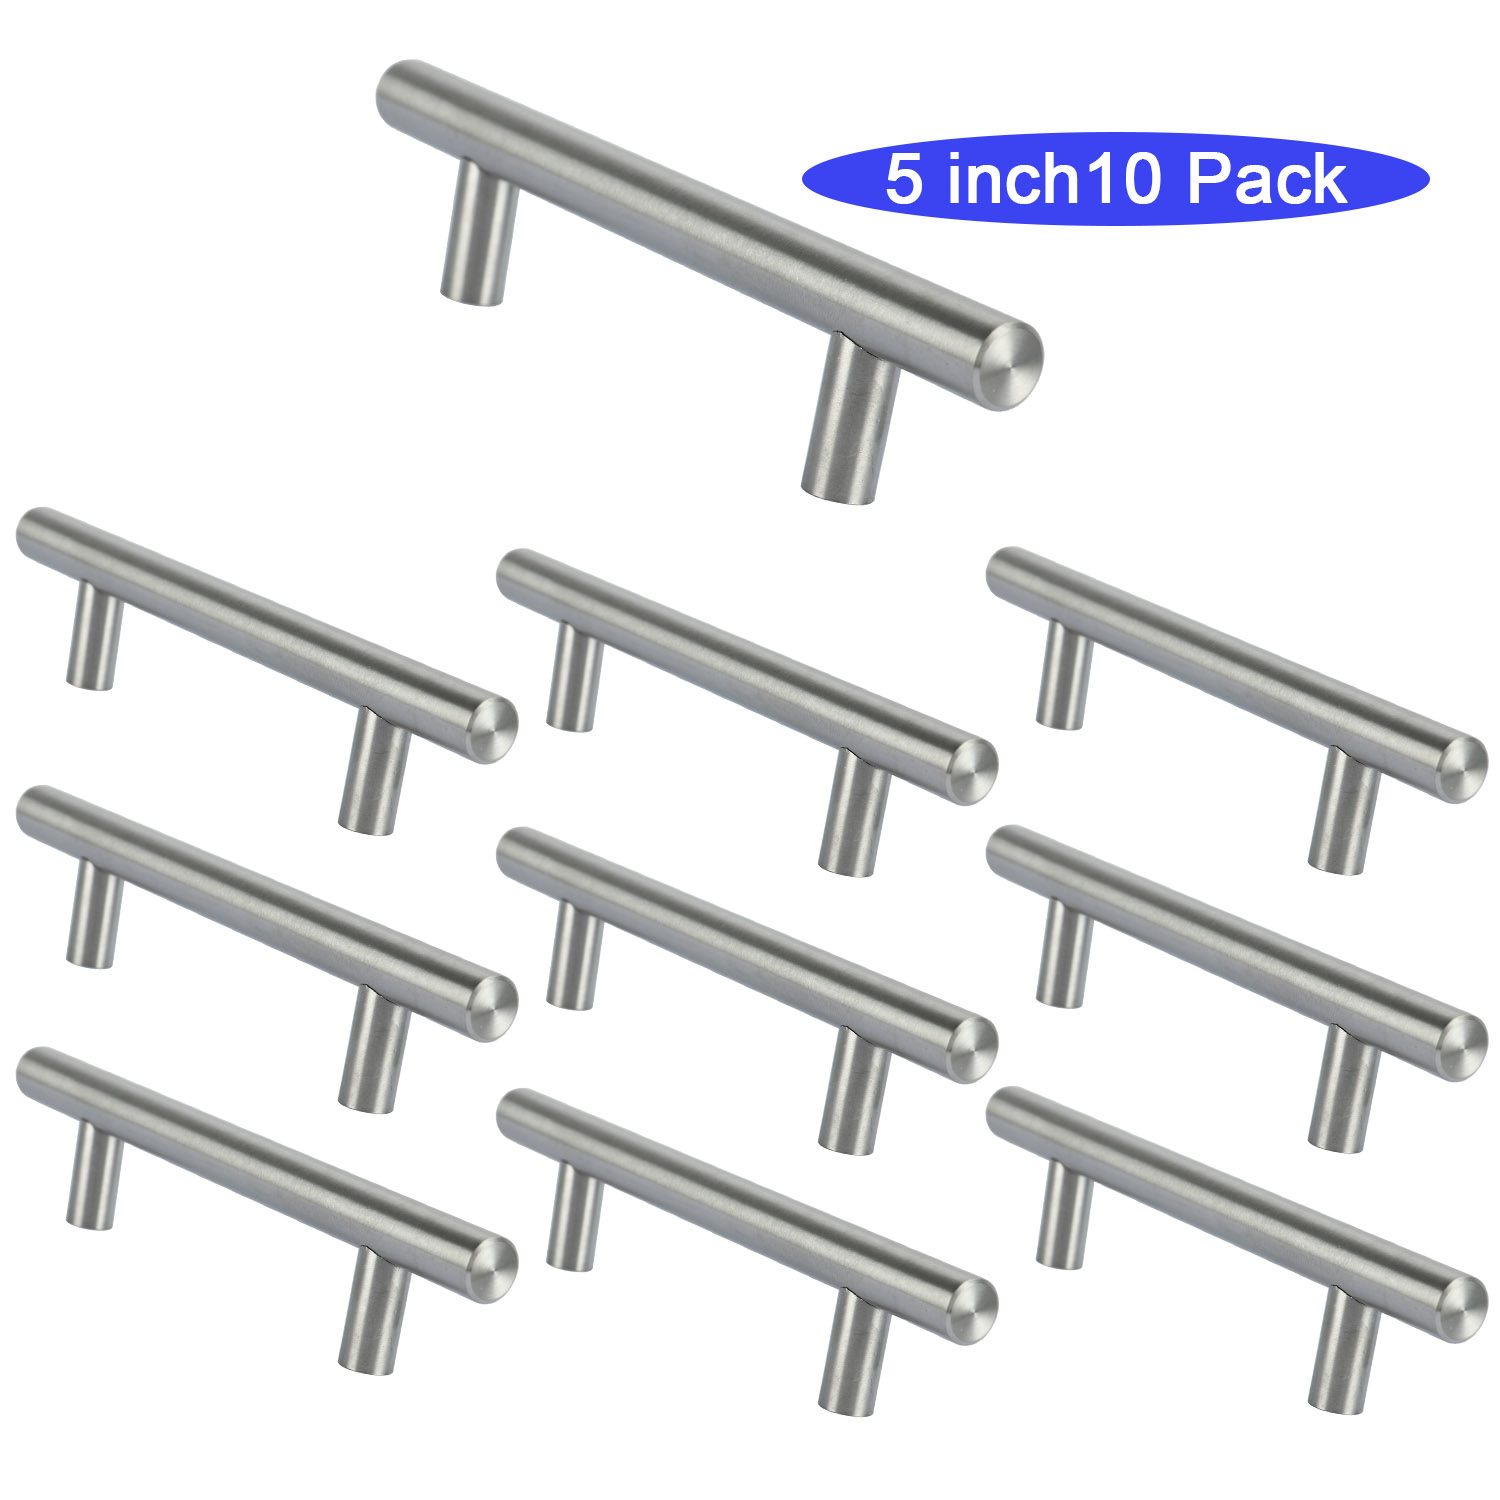 Homend 40pack Stainless Steel Kitchen Cabinet Handles T Bar Pull